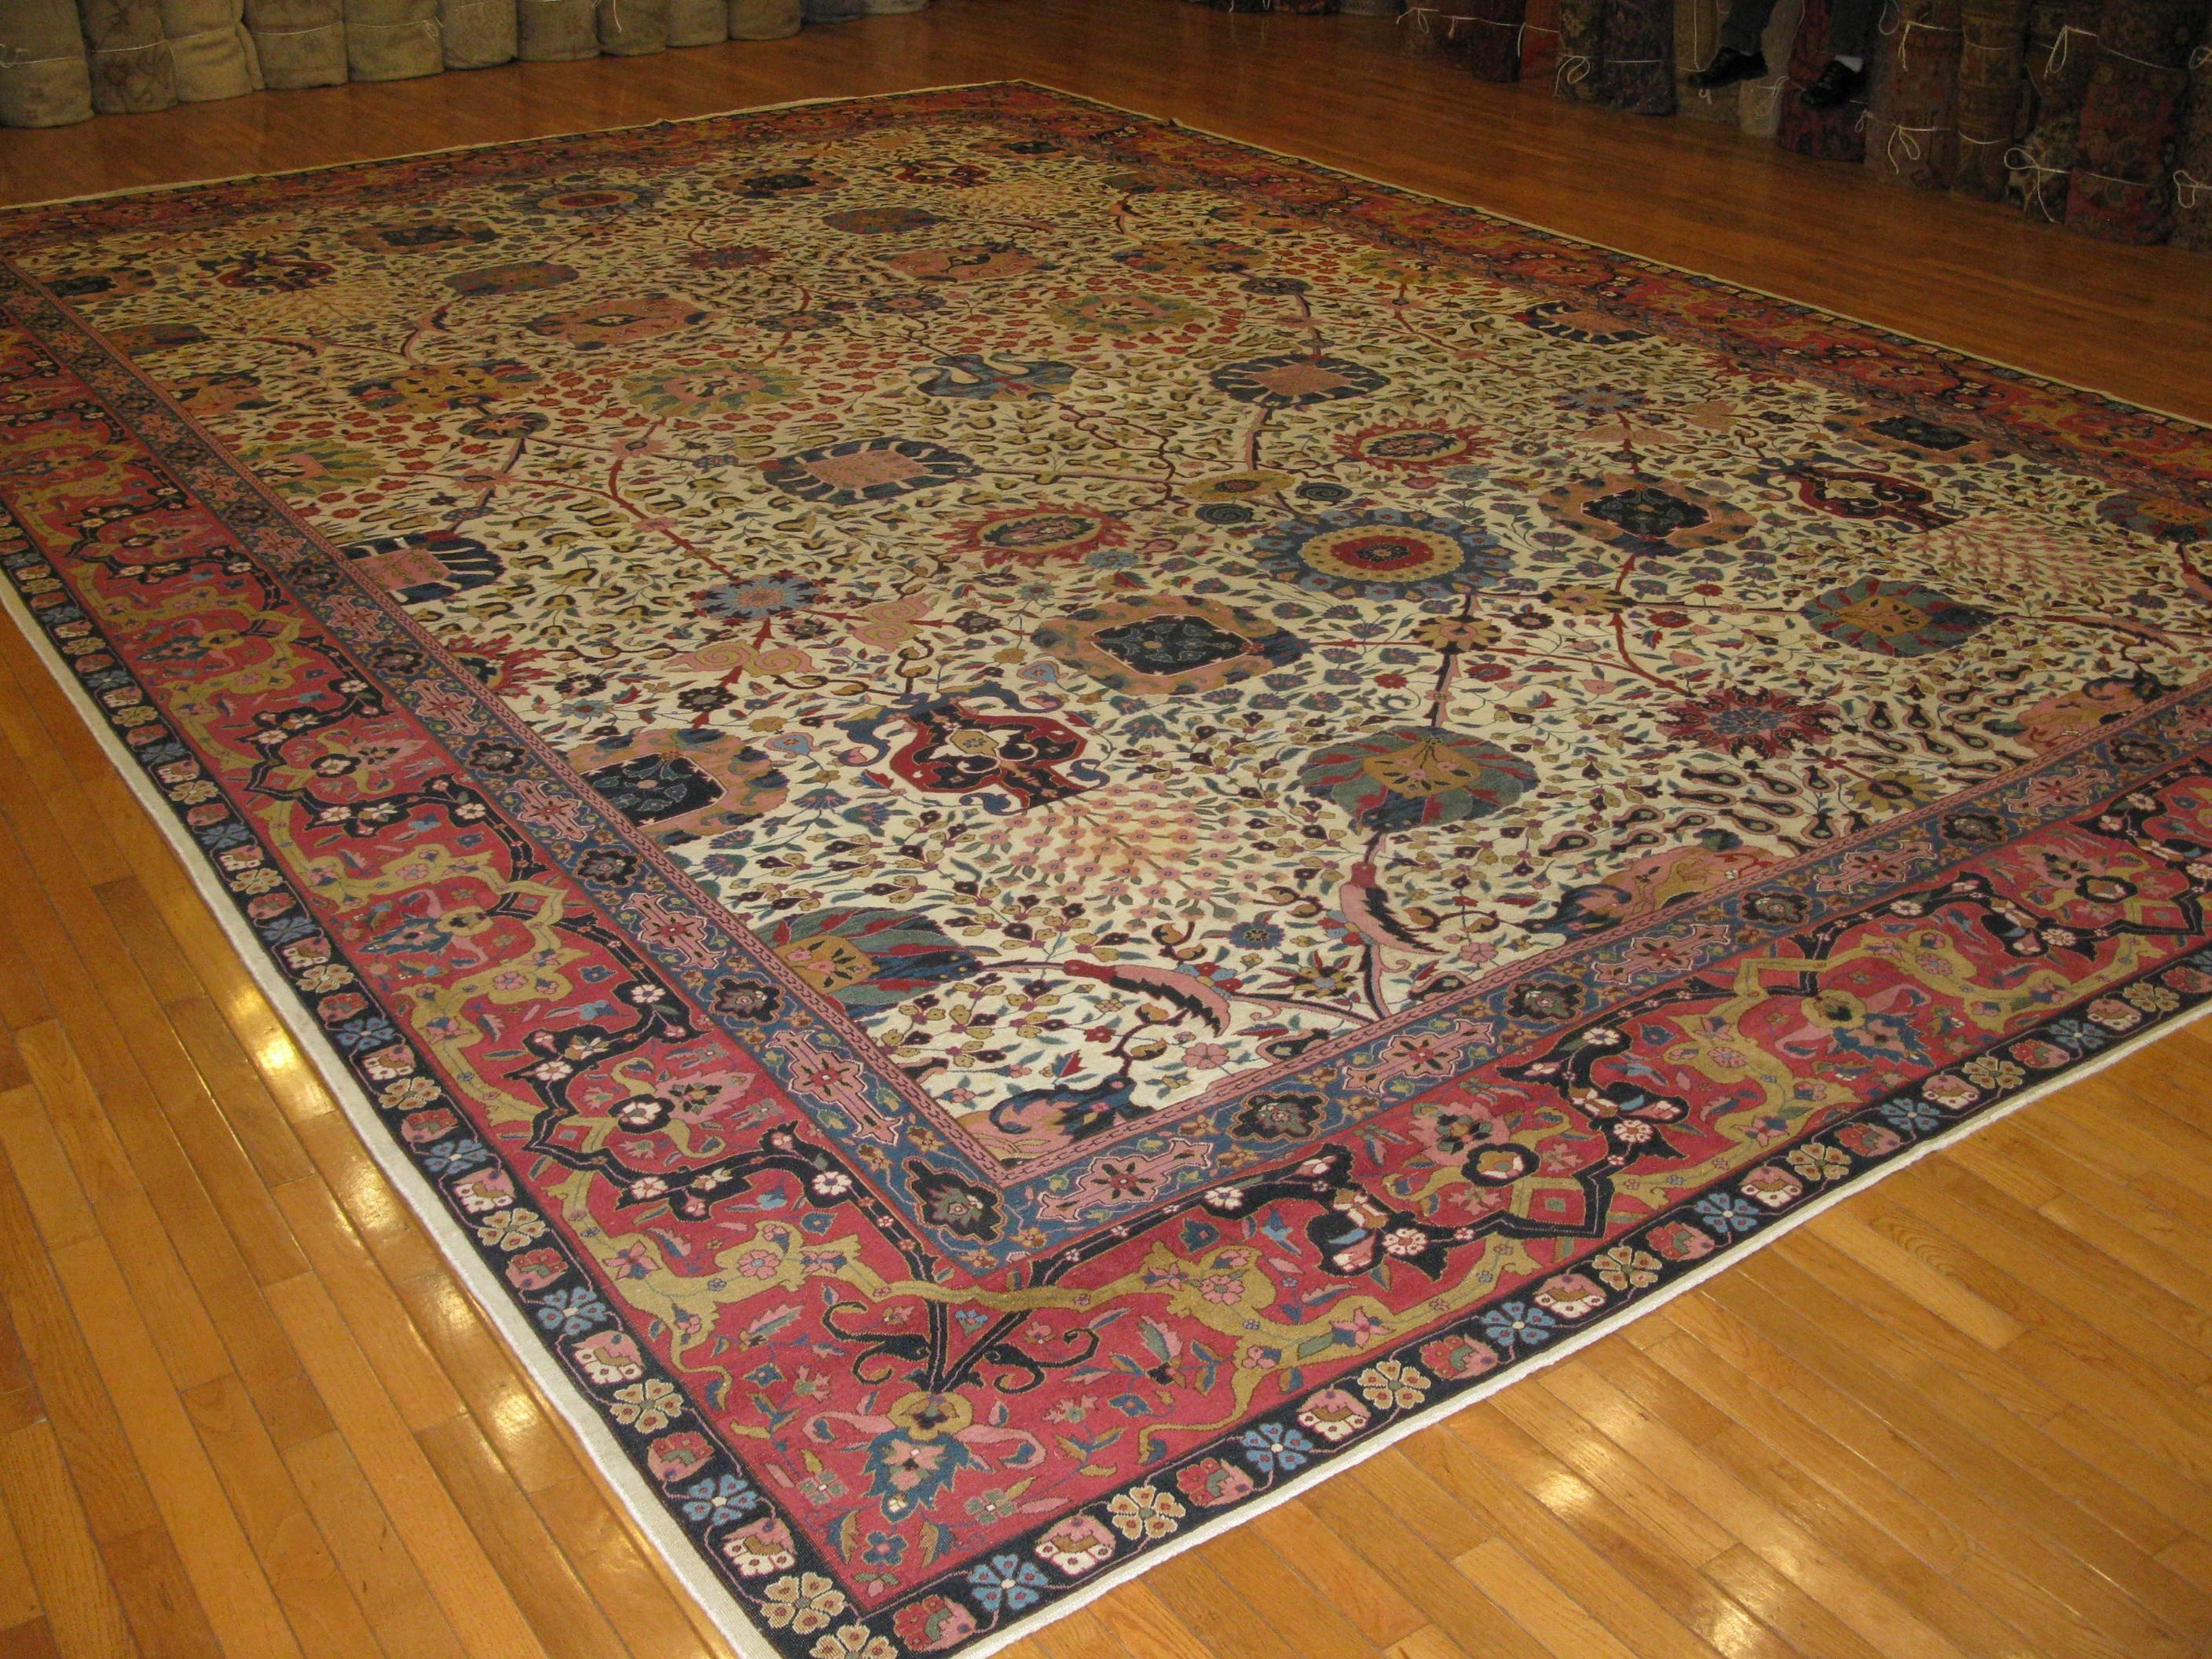 A fabulous large antique hand-knotted Indian Agra inspired by 17th century Persian Tabriz rugs. The rug has beautiful all-over floral pattern on an ivory field and red border. It is in very good shape.